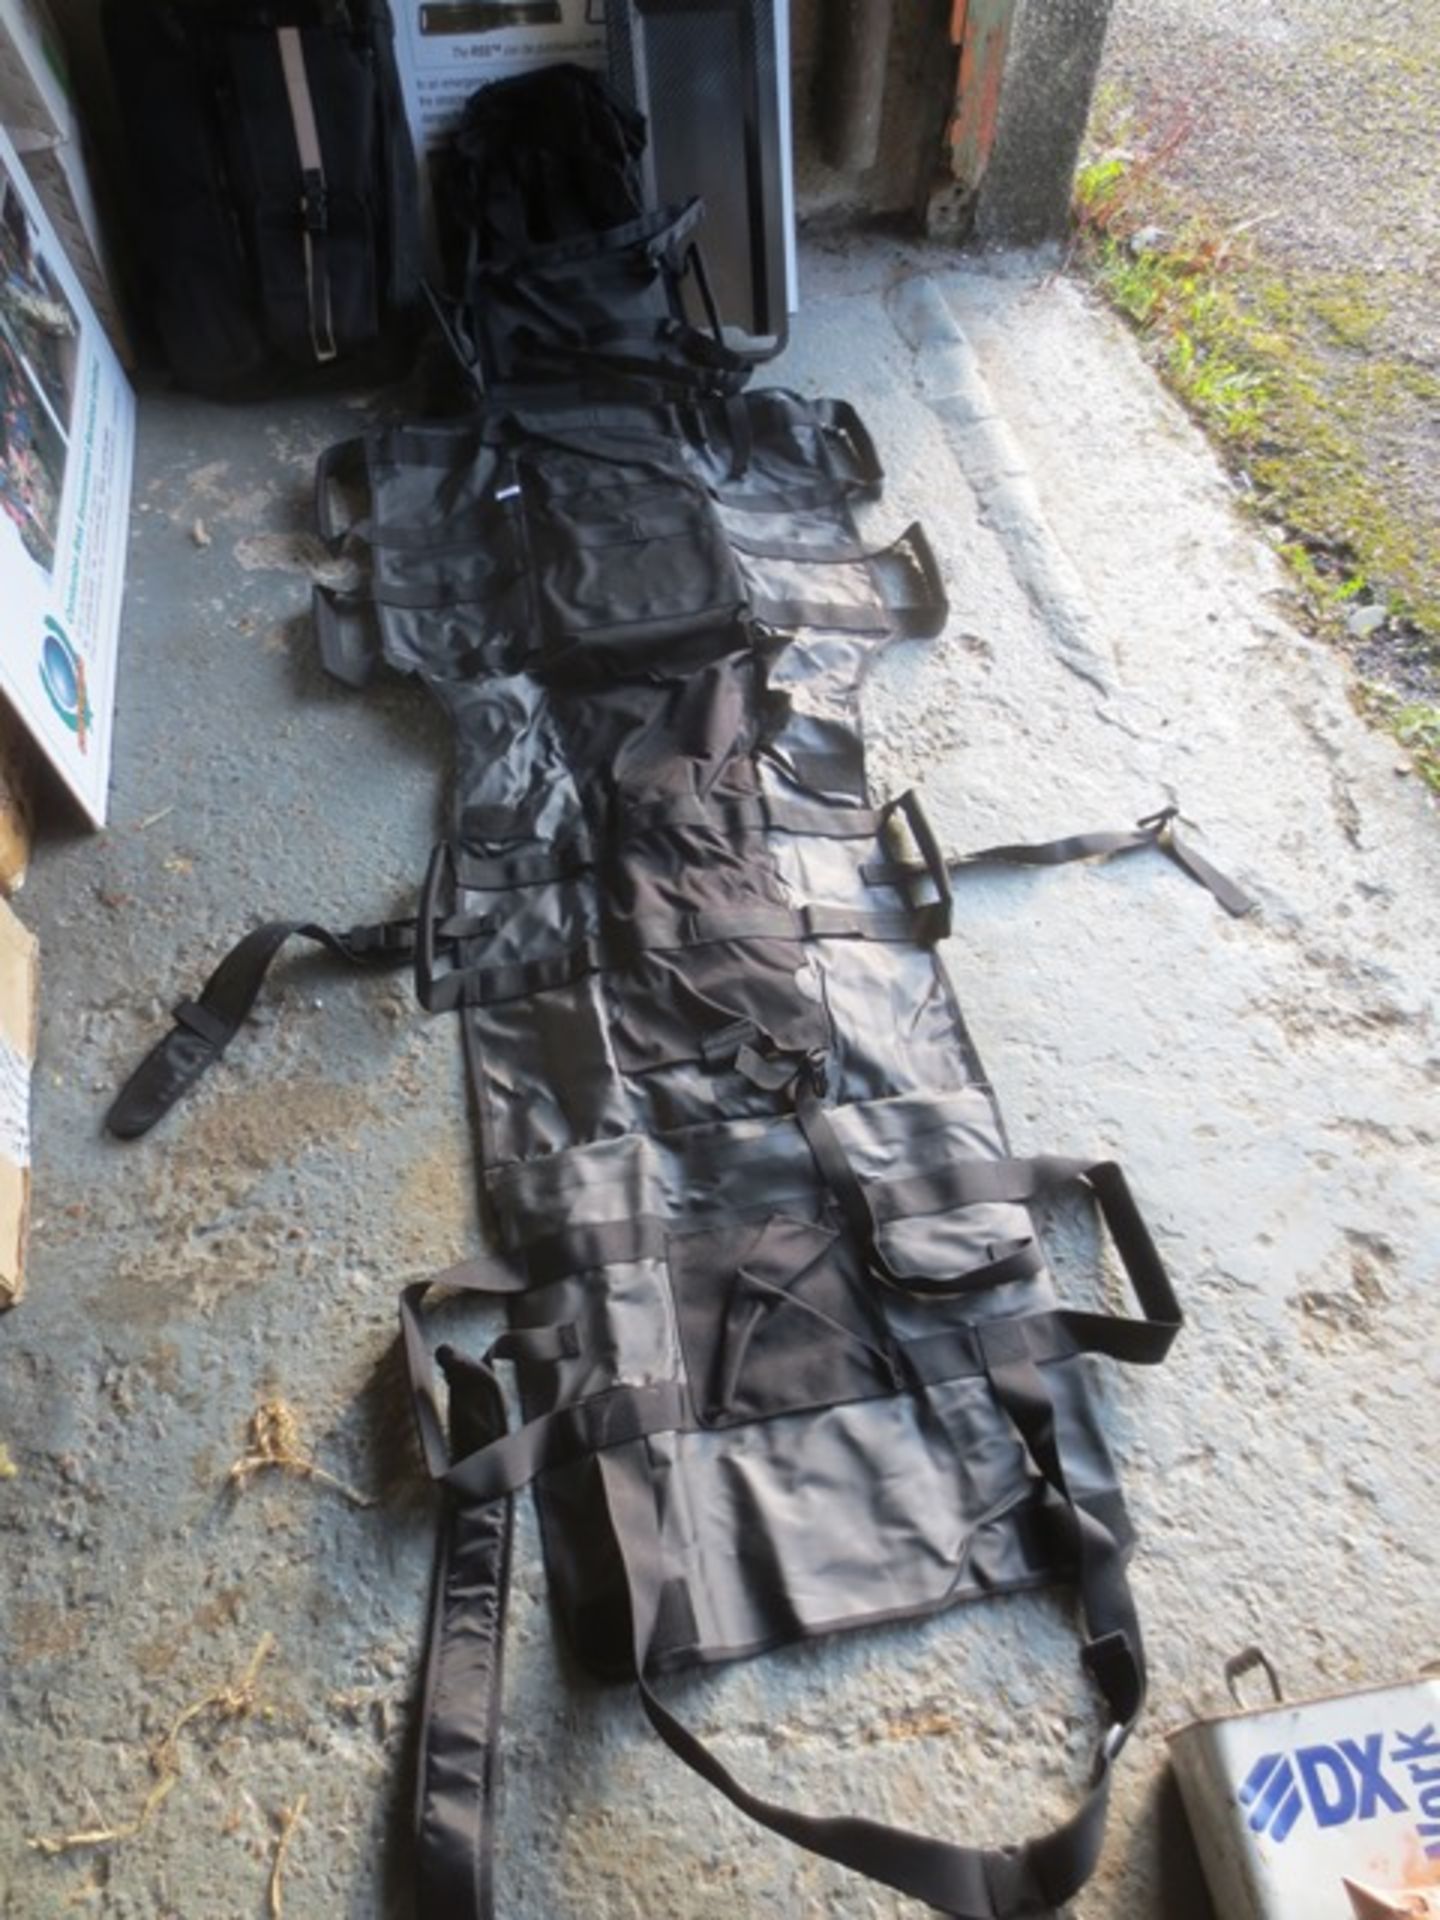 Black Rucksack Stretcher Systems (RSS) Day sack/grab bag, fold out rucksack stretcher, with - Image 6 of 9